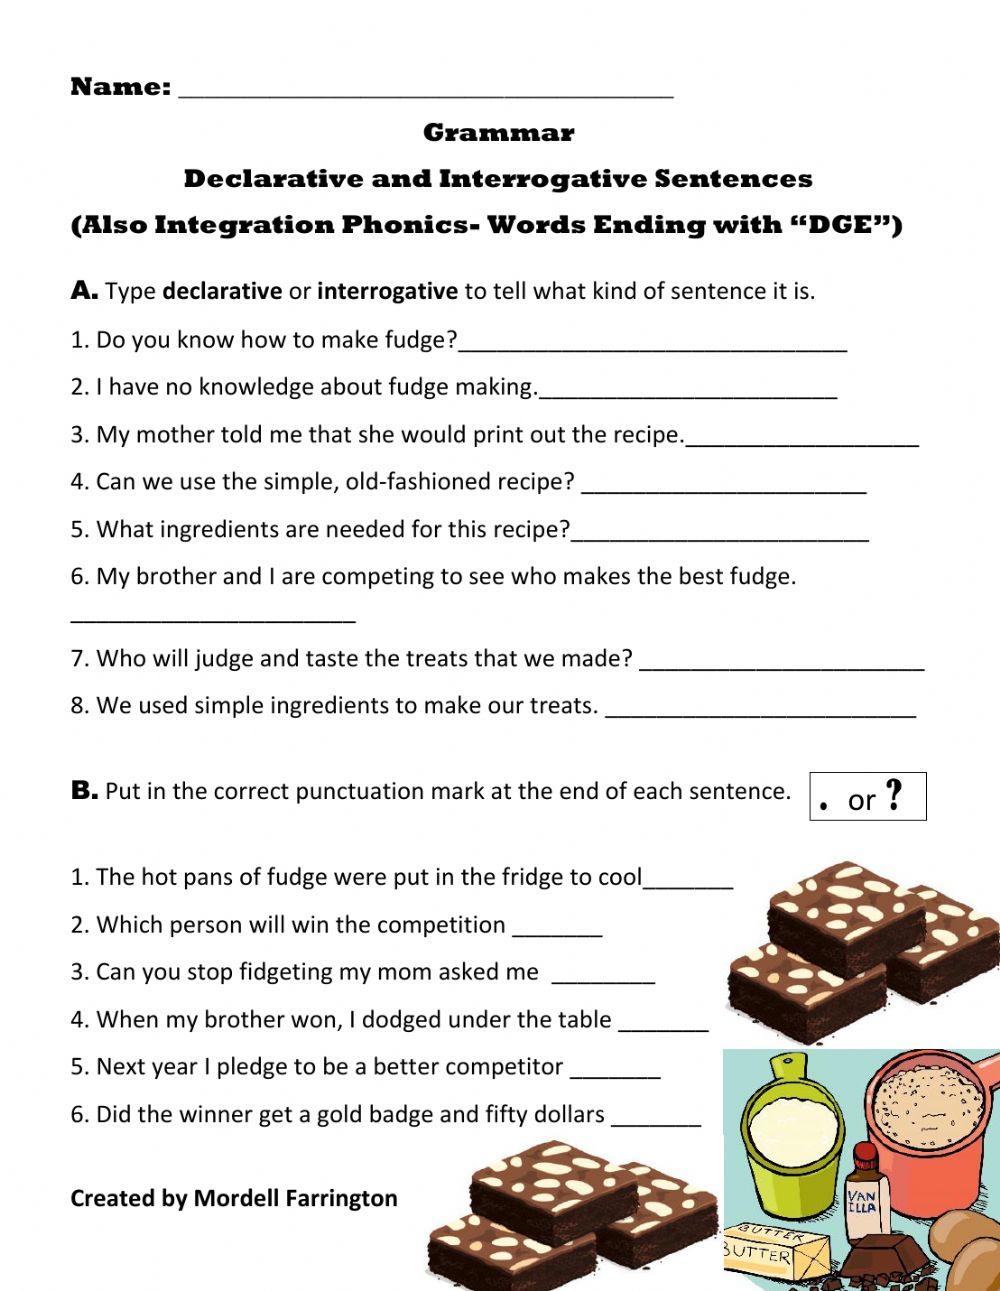 Sentences Declarative and Interrogative- Also: Phonics- Words that End with -dge-